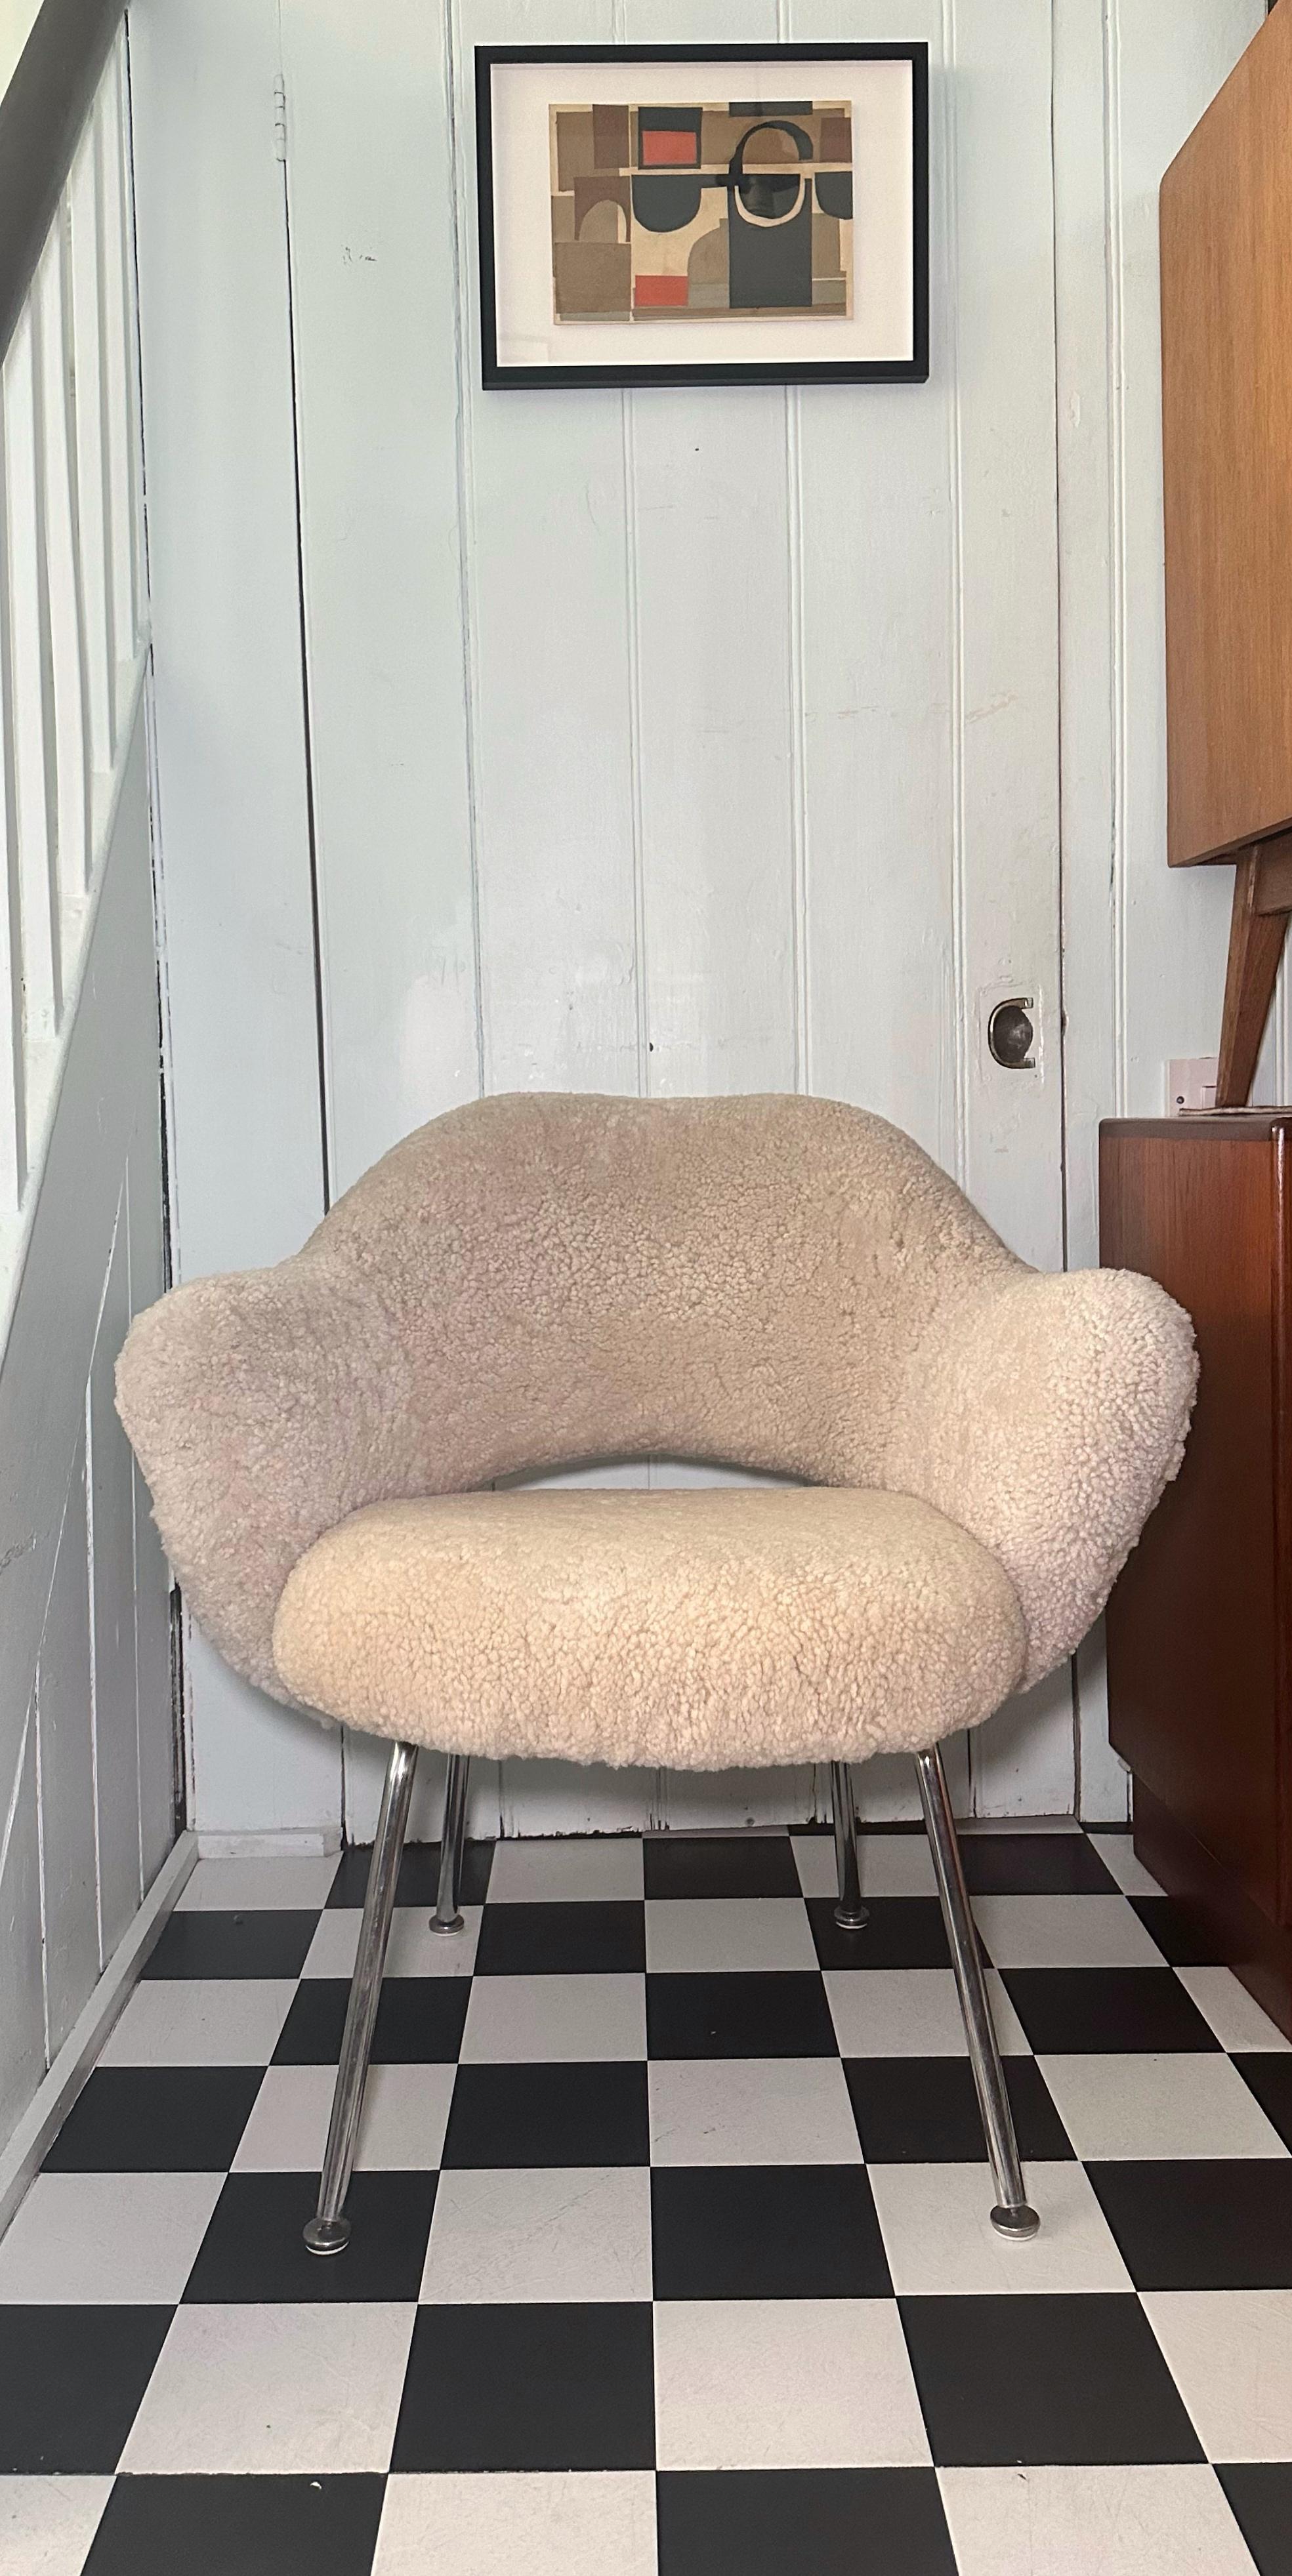 Add a touch of luxury and sophistication to your home with this Mid Century original 1950's armchair by Eero Saarinen for Knoll. Reupholstered in the finest Moonlight Sheepskin, this chair exudes elegance and comfort. The chrome base adds a sleek